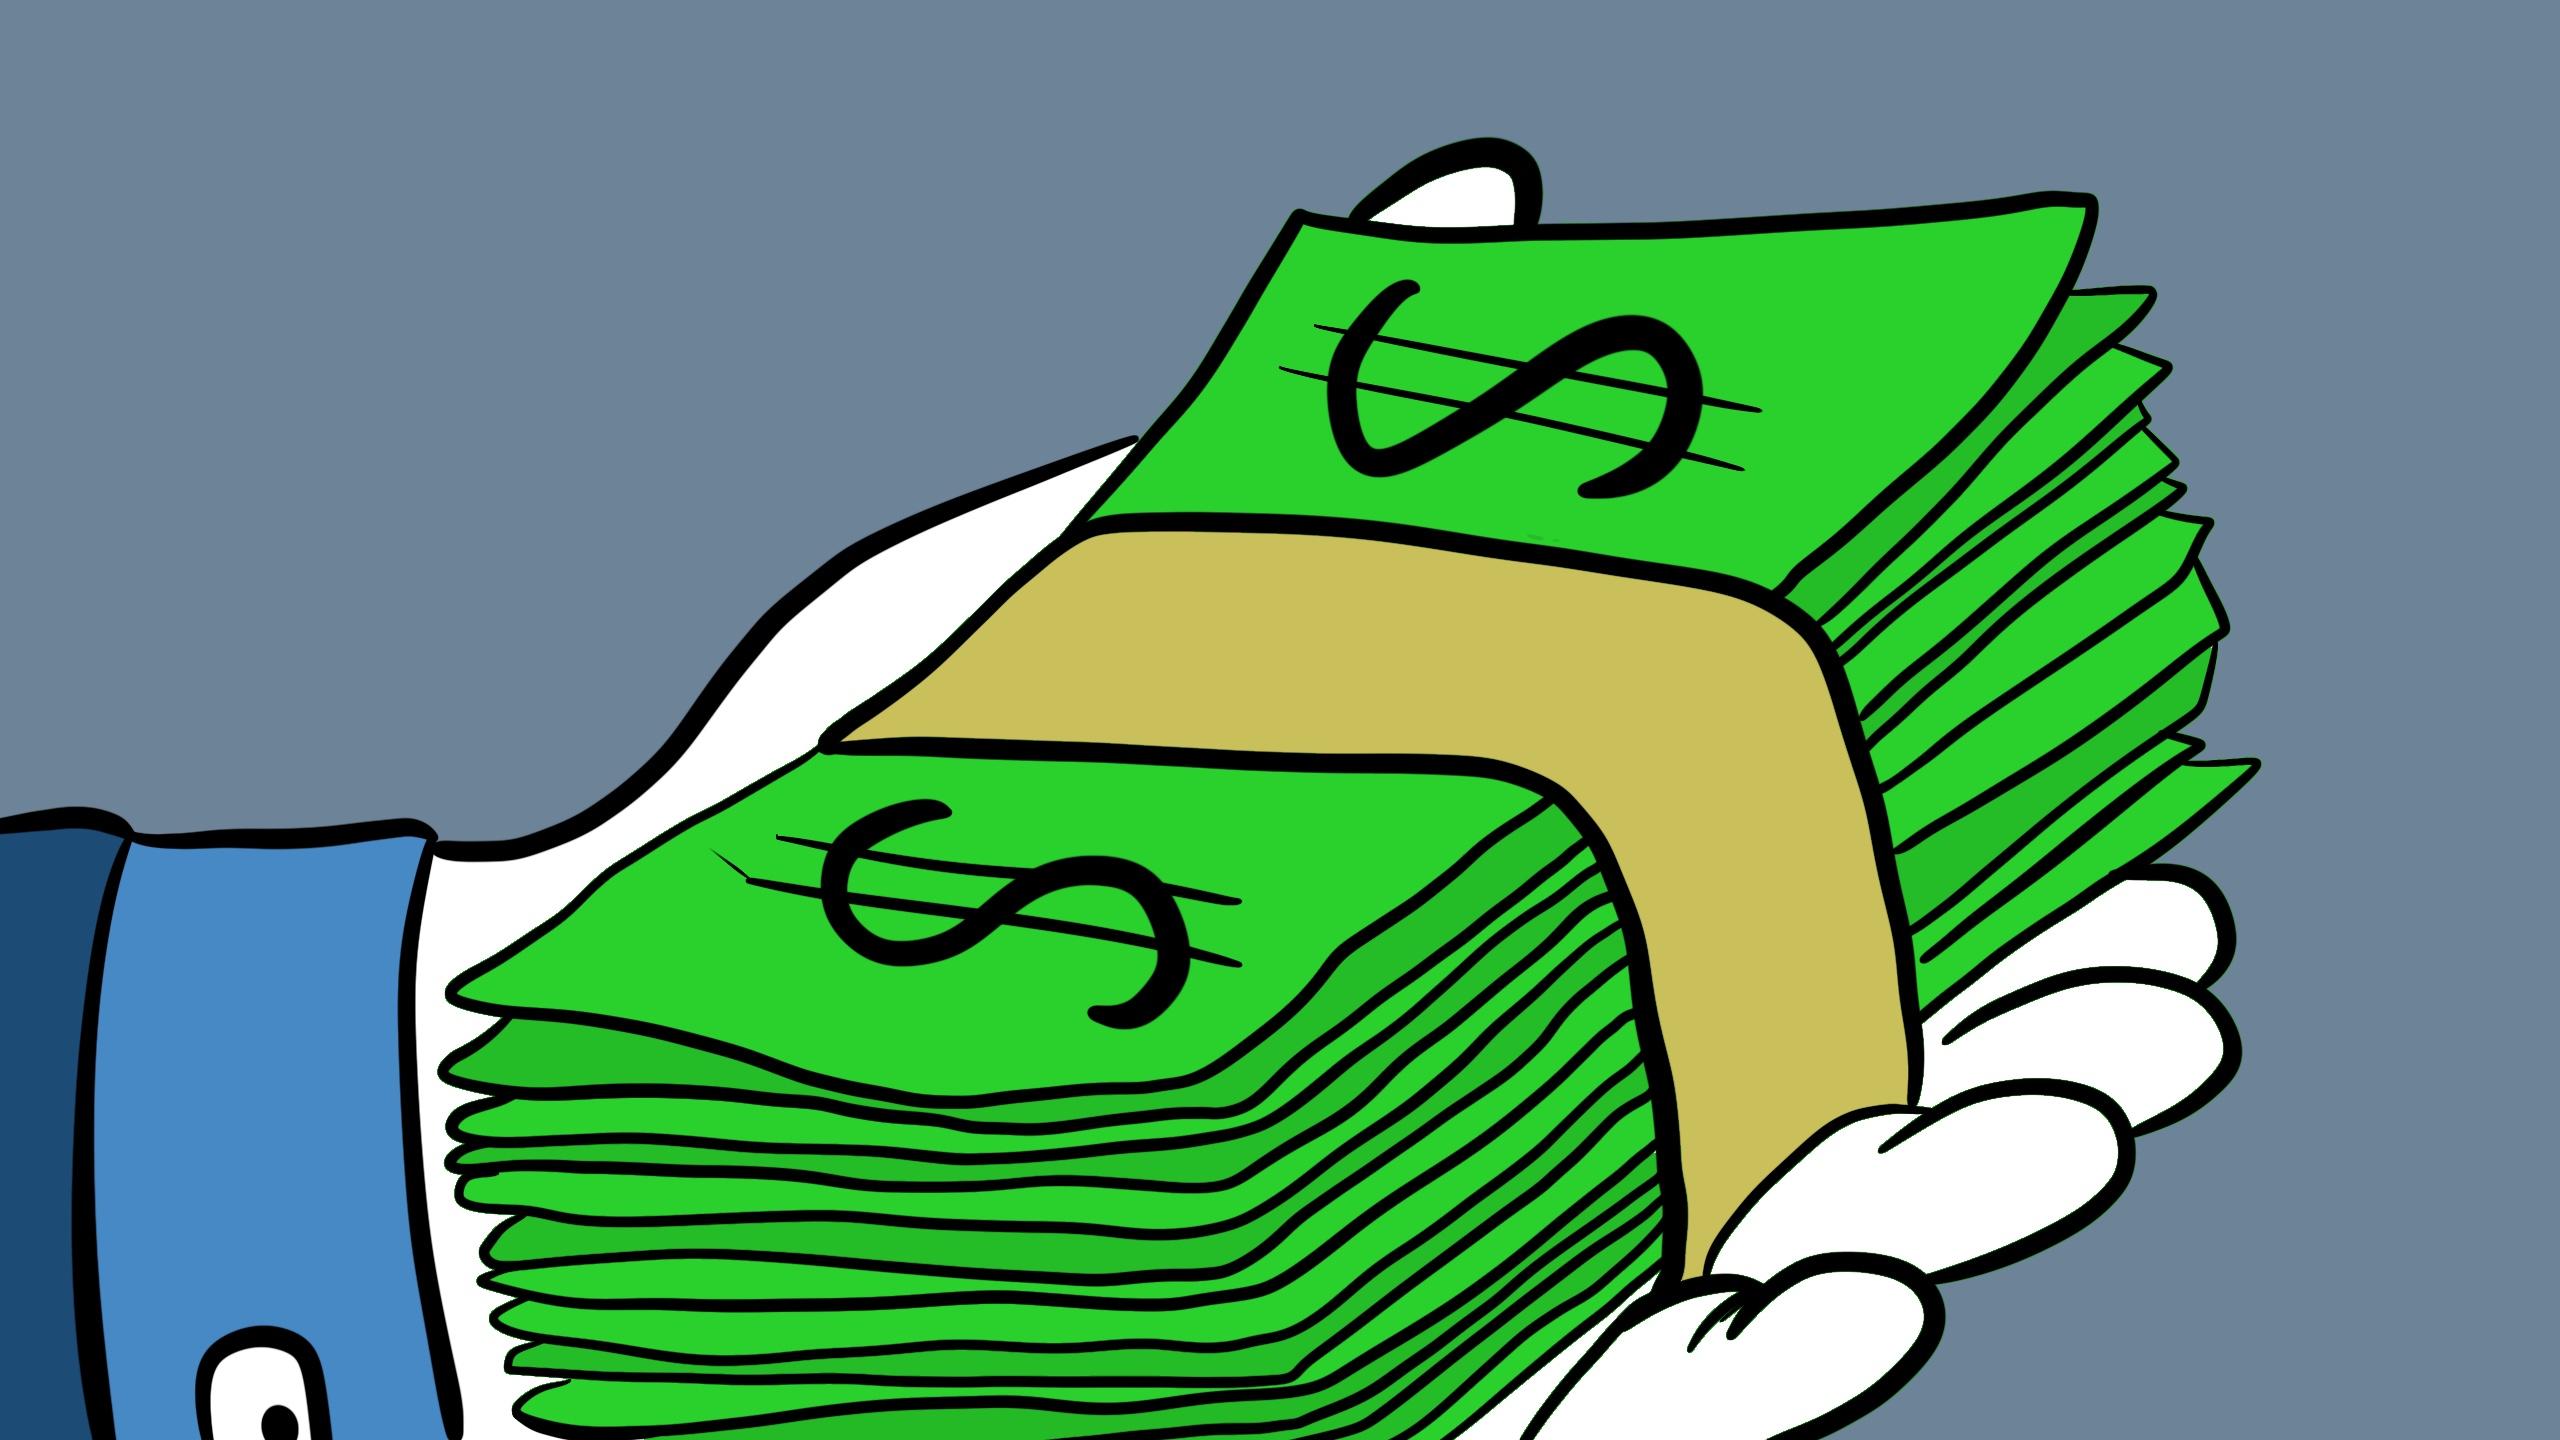 illustration of a hand holing a stack of money